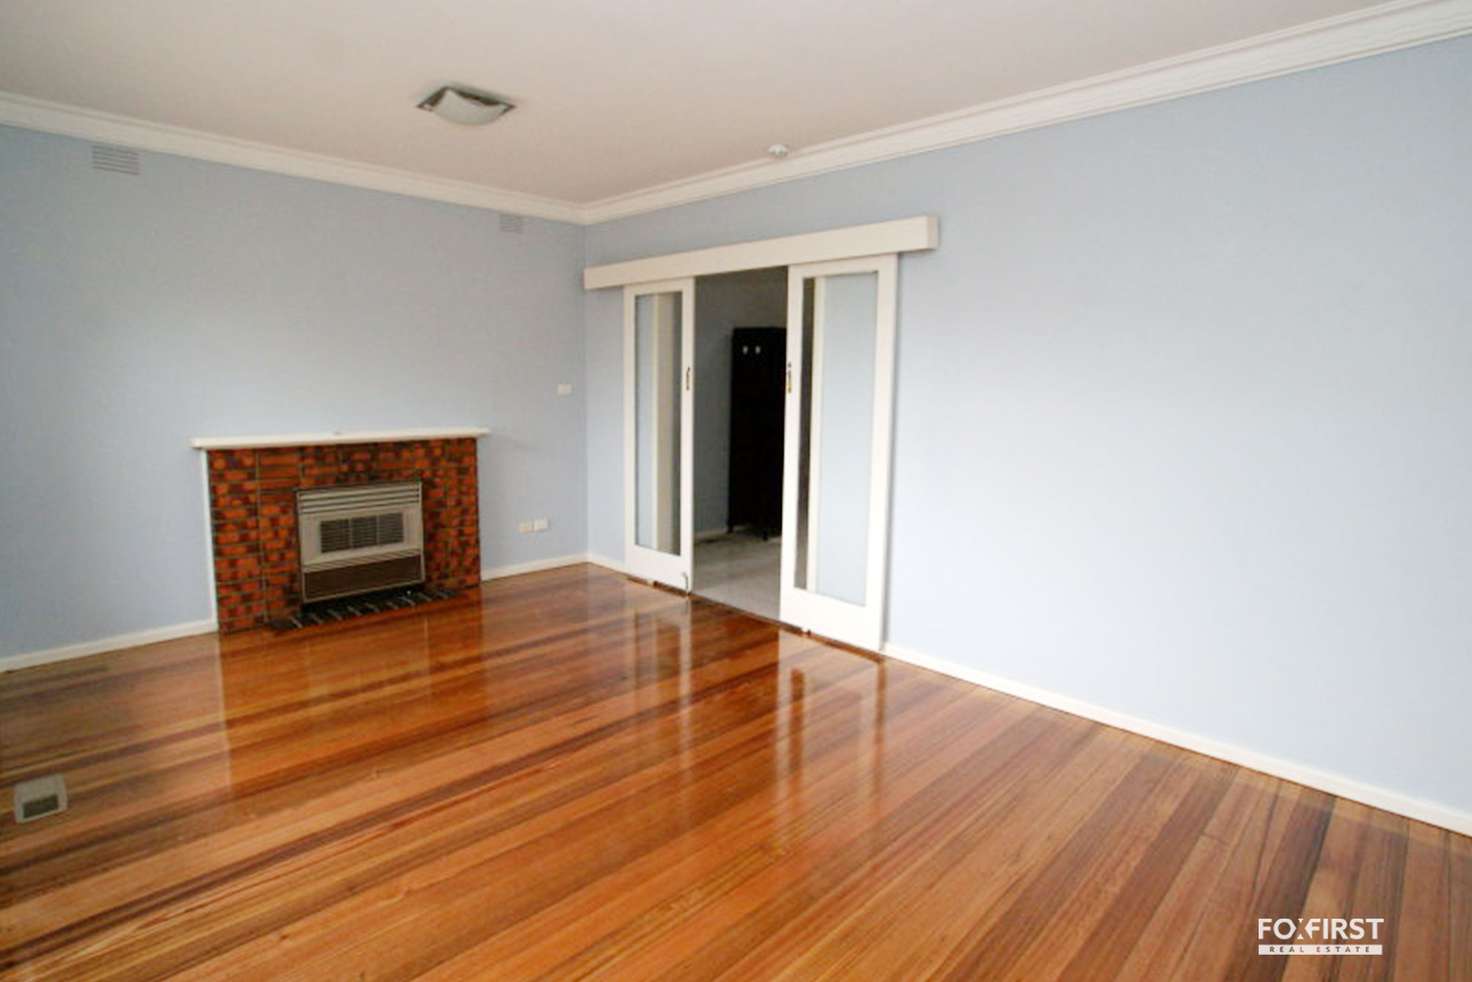 Main view of Homely unit listing, 19 Leonie Avenue, Mount Waverley VIC 3149